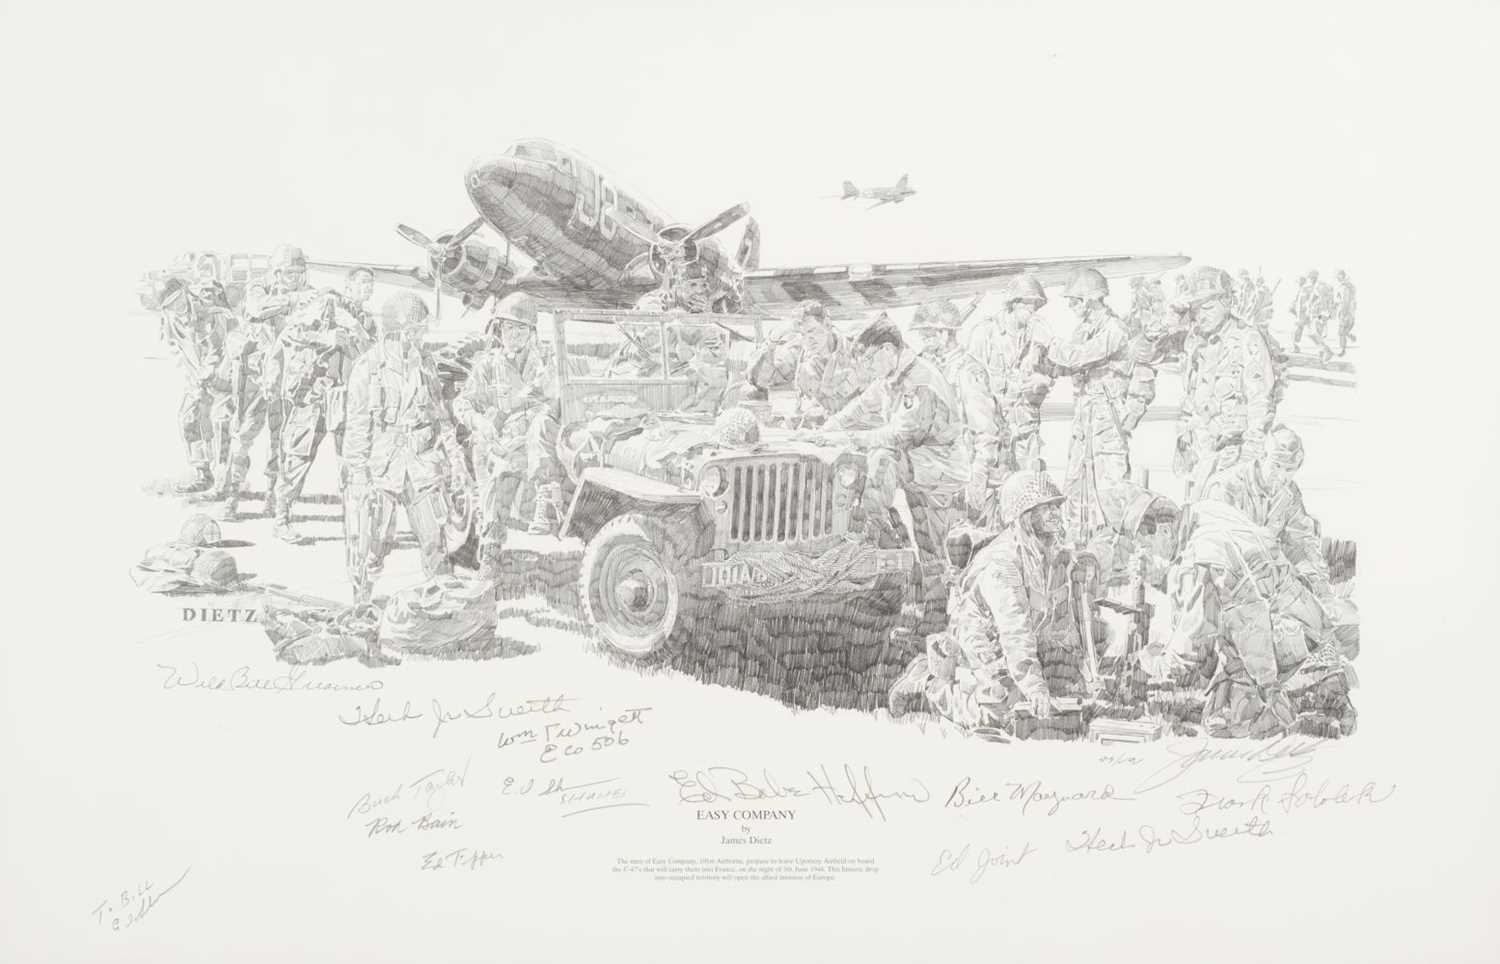 Lot 119 - Dietz (James). Easy Company, black and white print, limited edition 95/101 and helmet